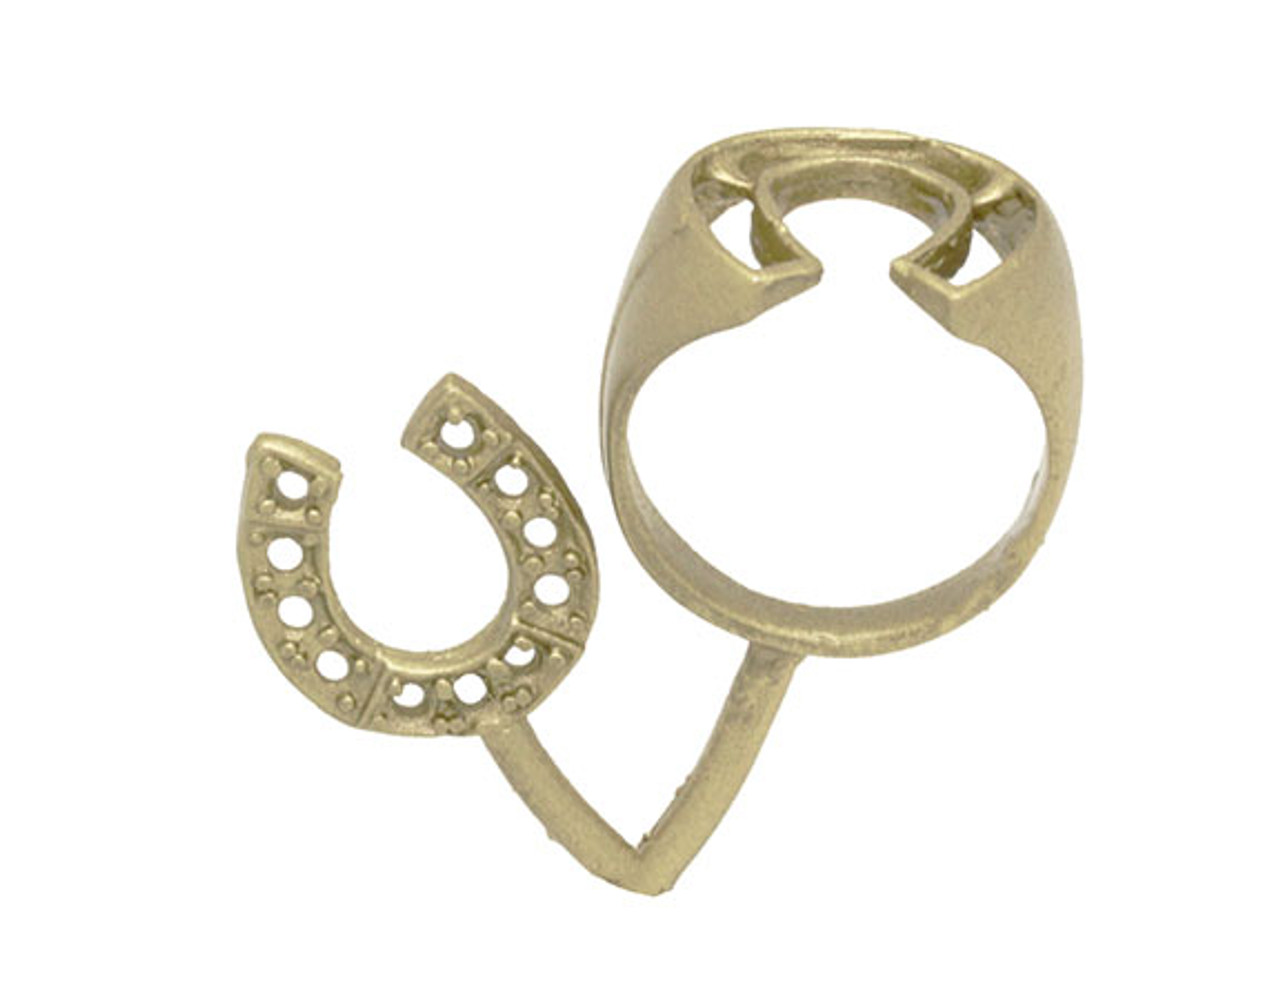 Horse Shoe Ring with stone setting